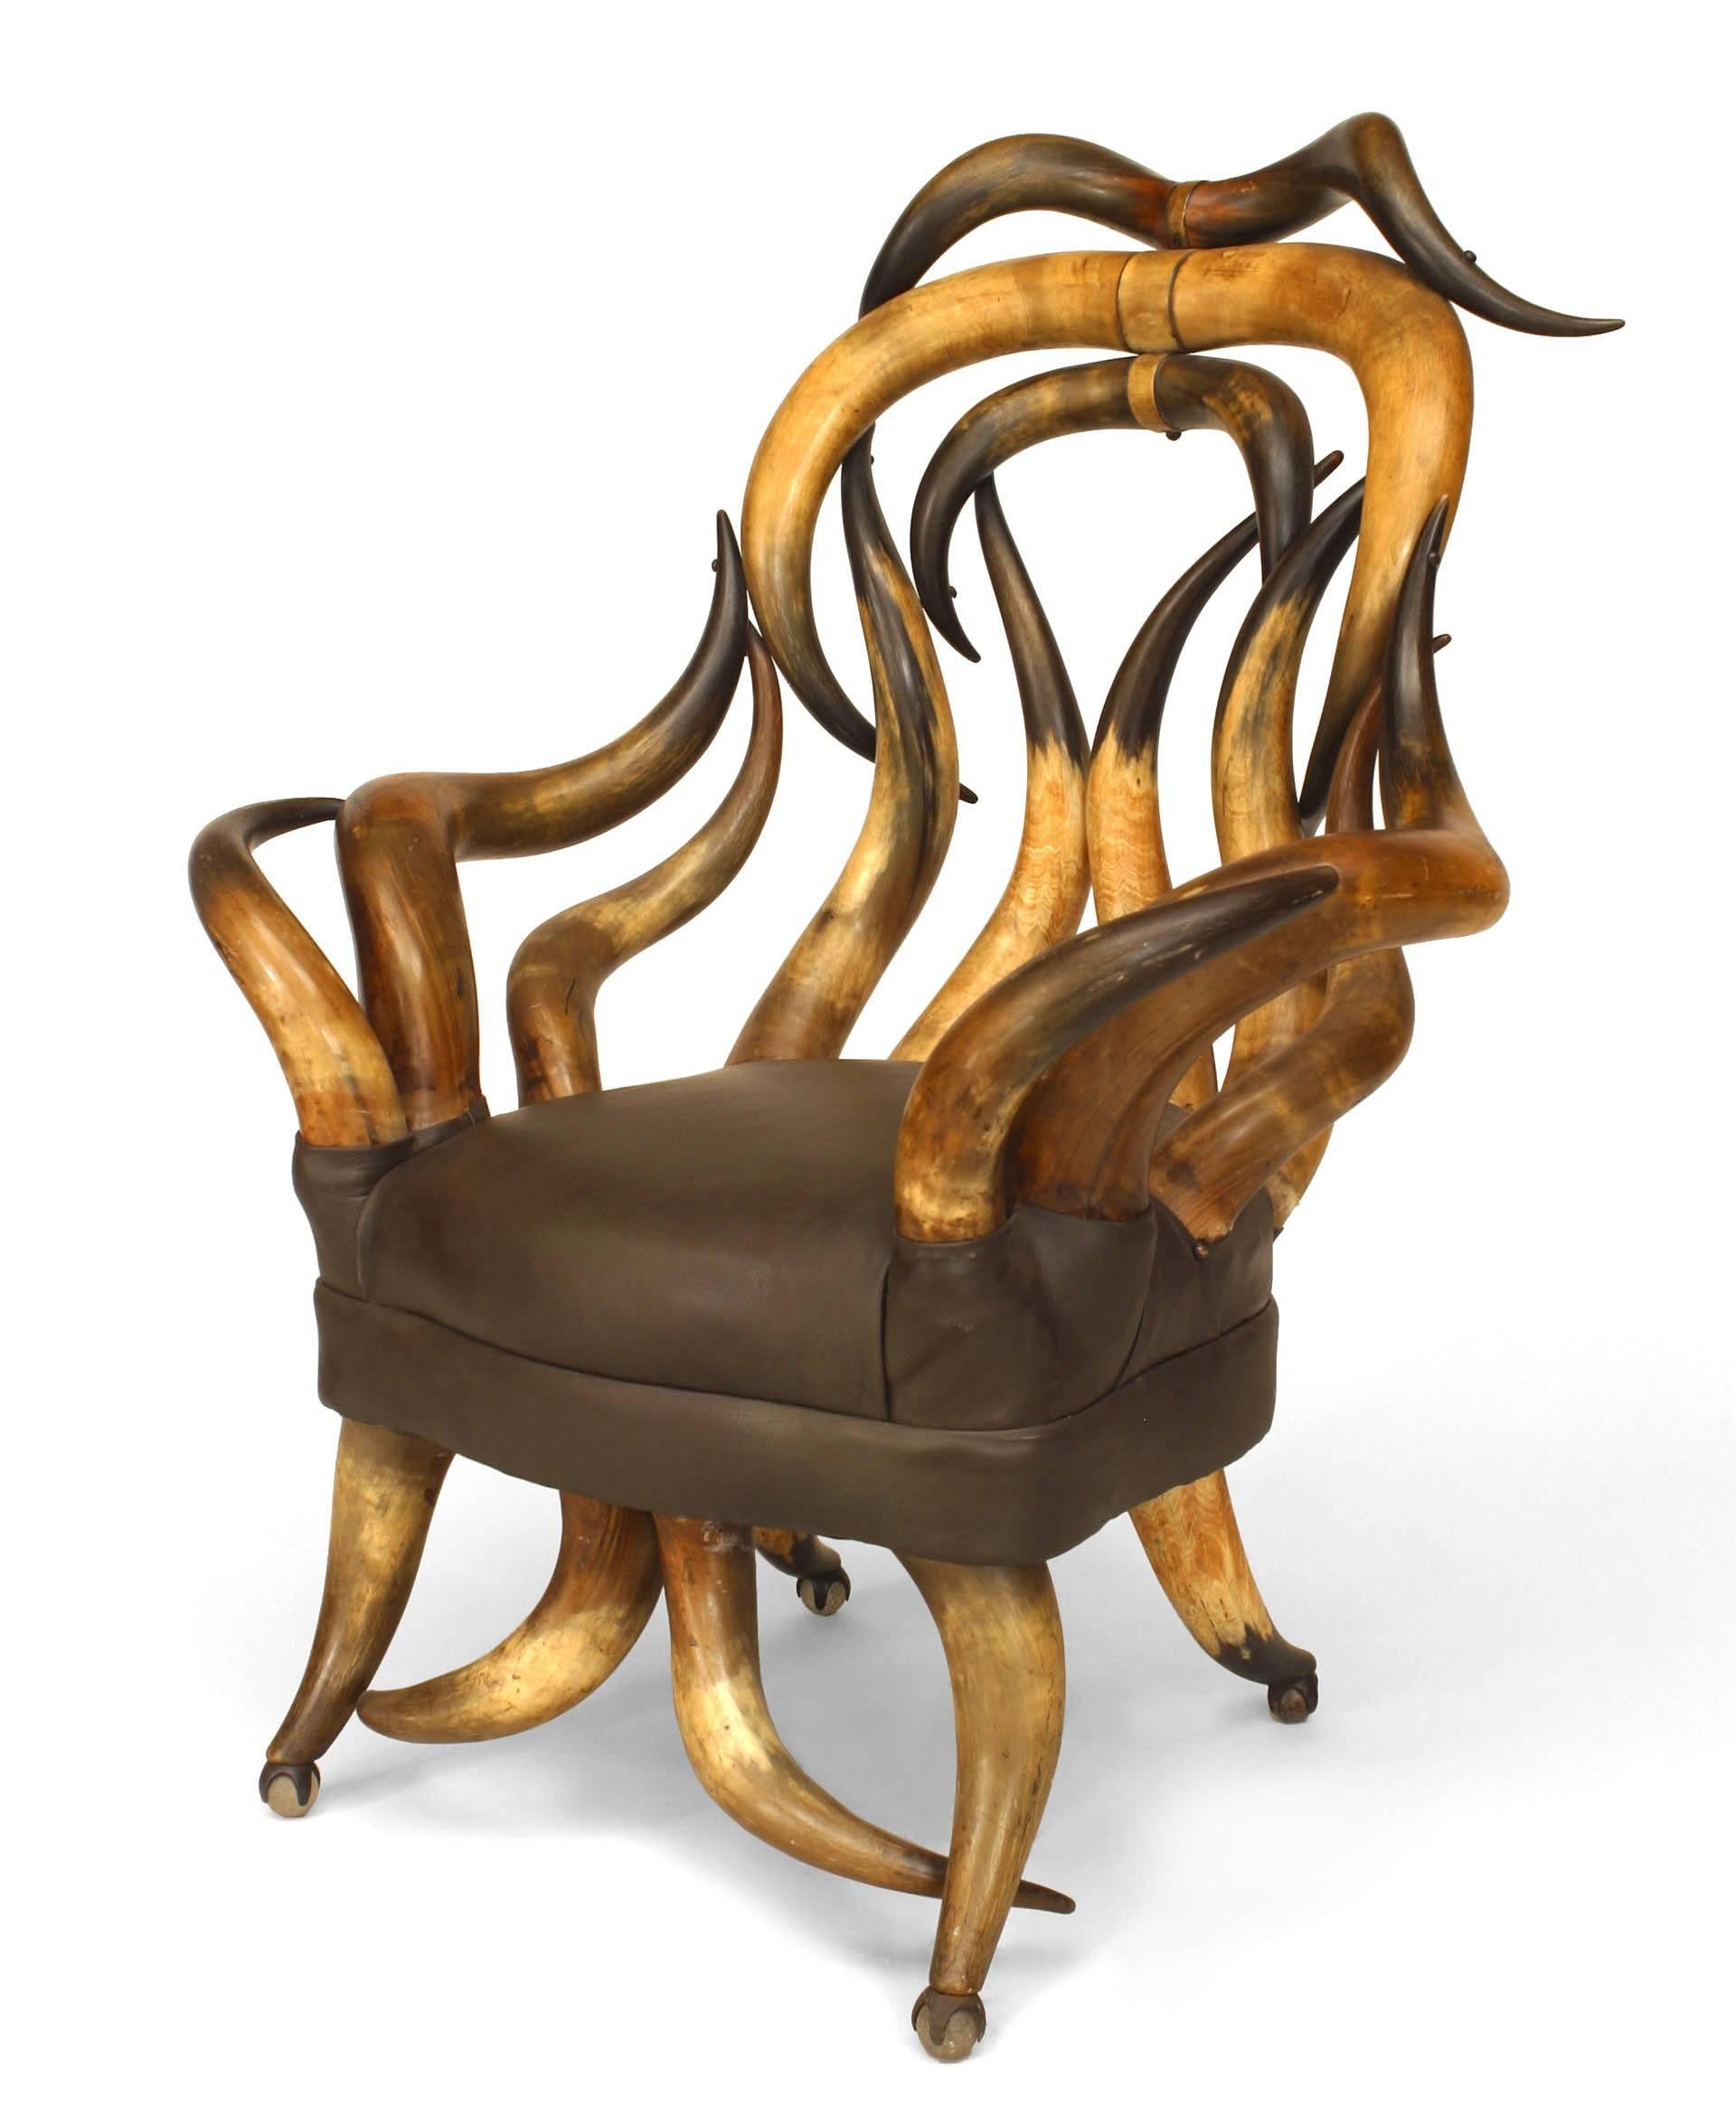 American Rustic (last quarter 19th Cent) steer horn arm chair with high back and dark brown upholstered seat. (by Charles Puppe, San Antonio, TX)
